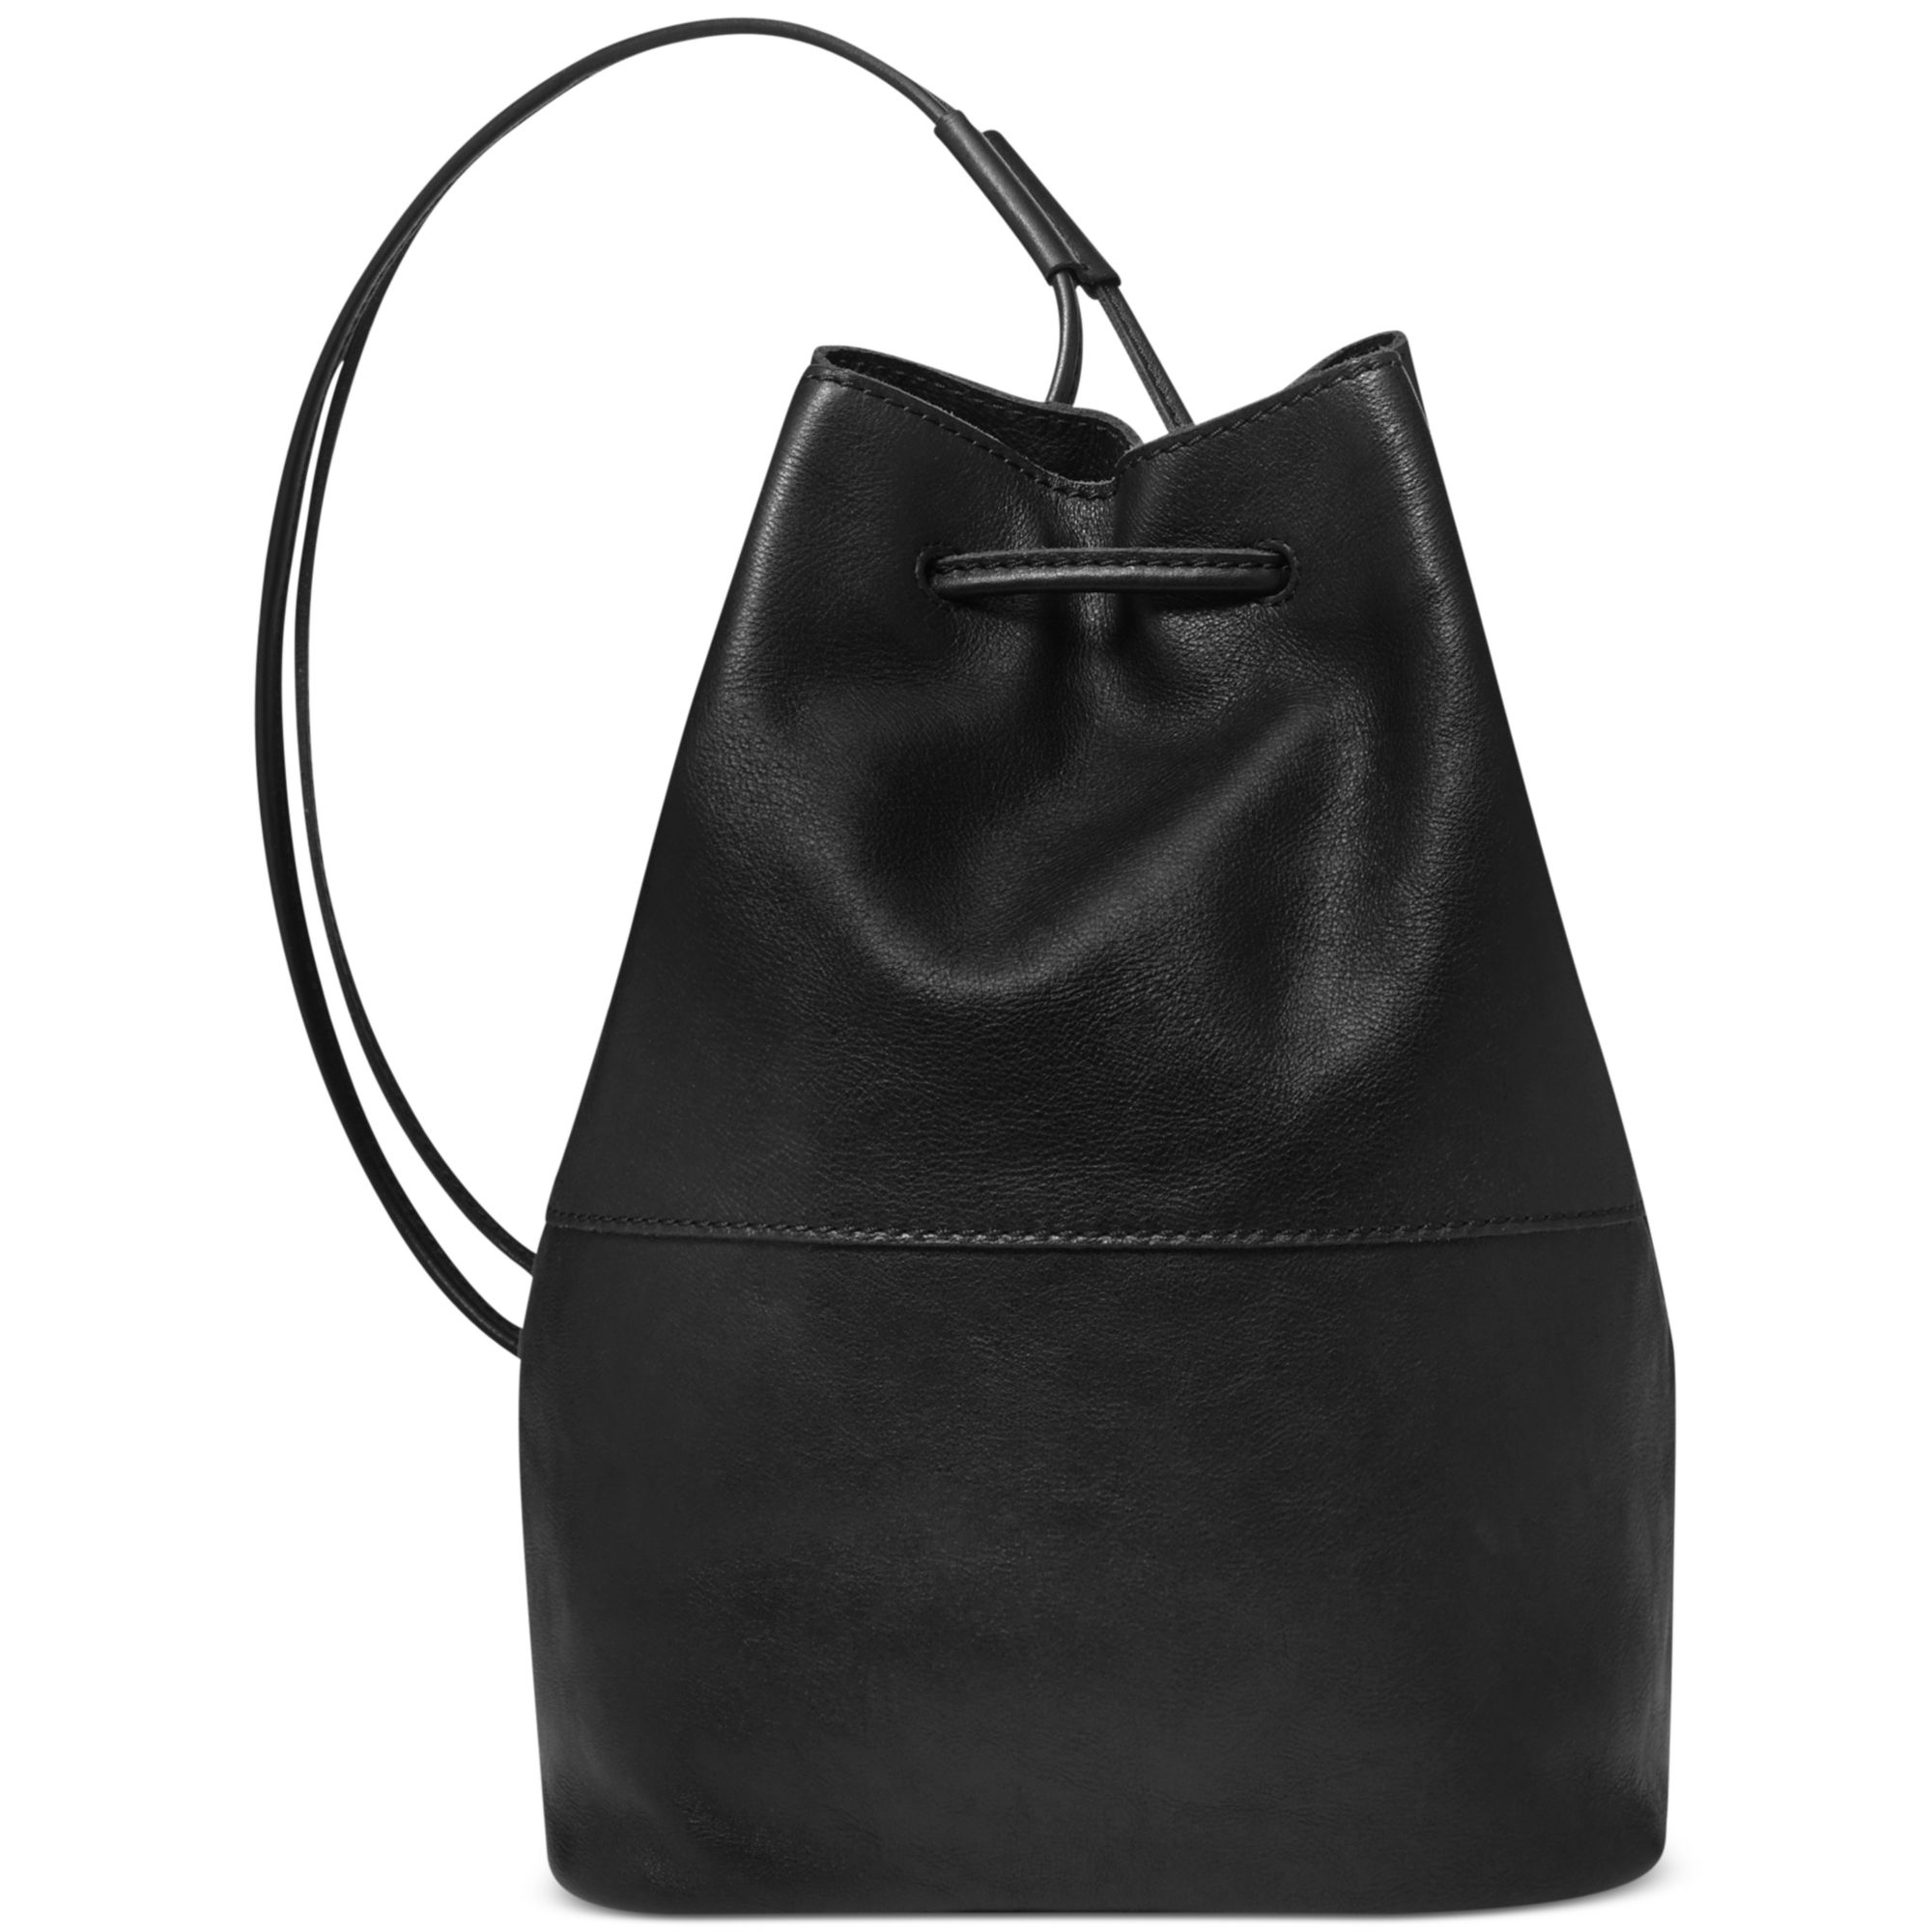 Womens Leather Sling Bags | Stanford Center for Opportunity Policy in Education